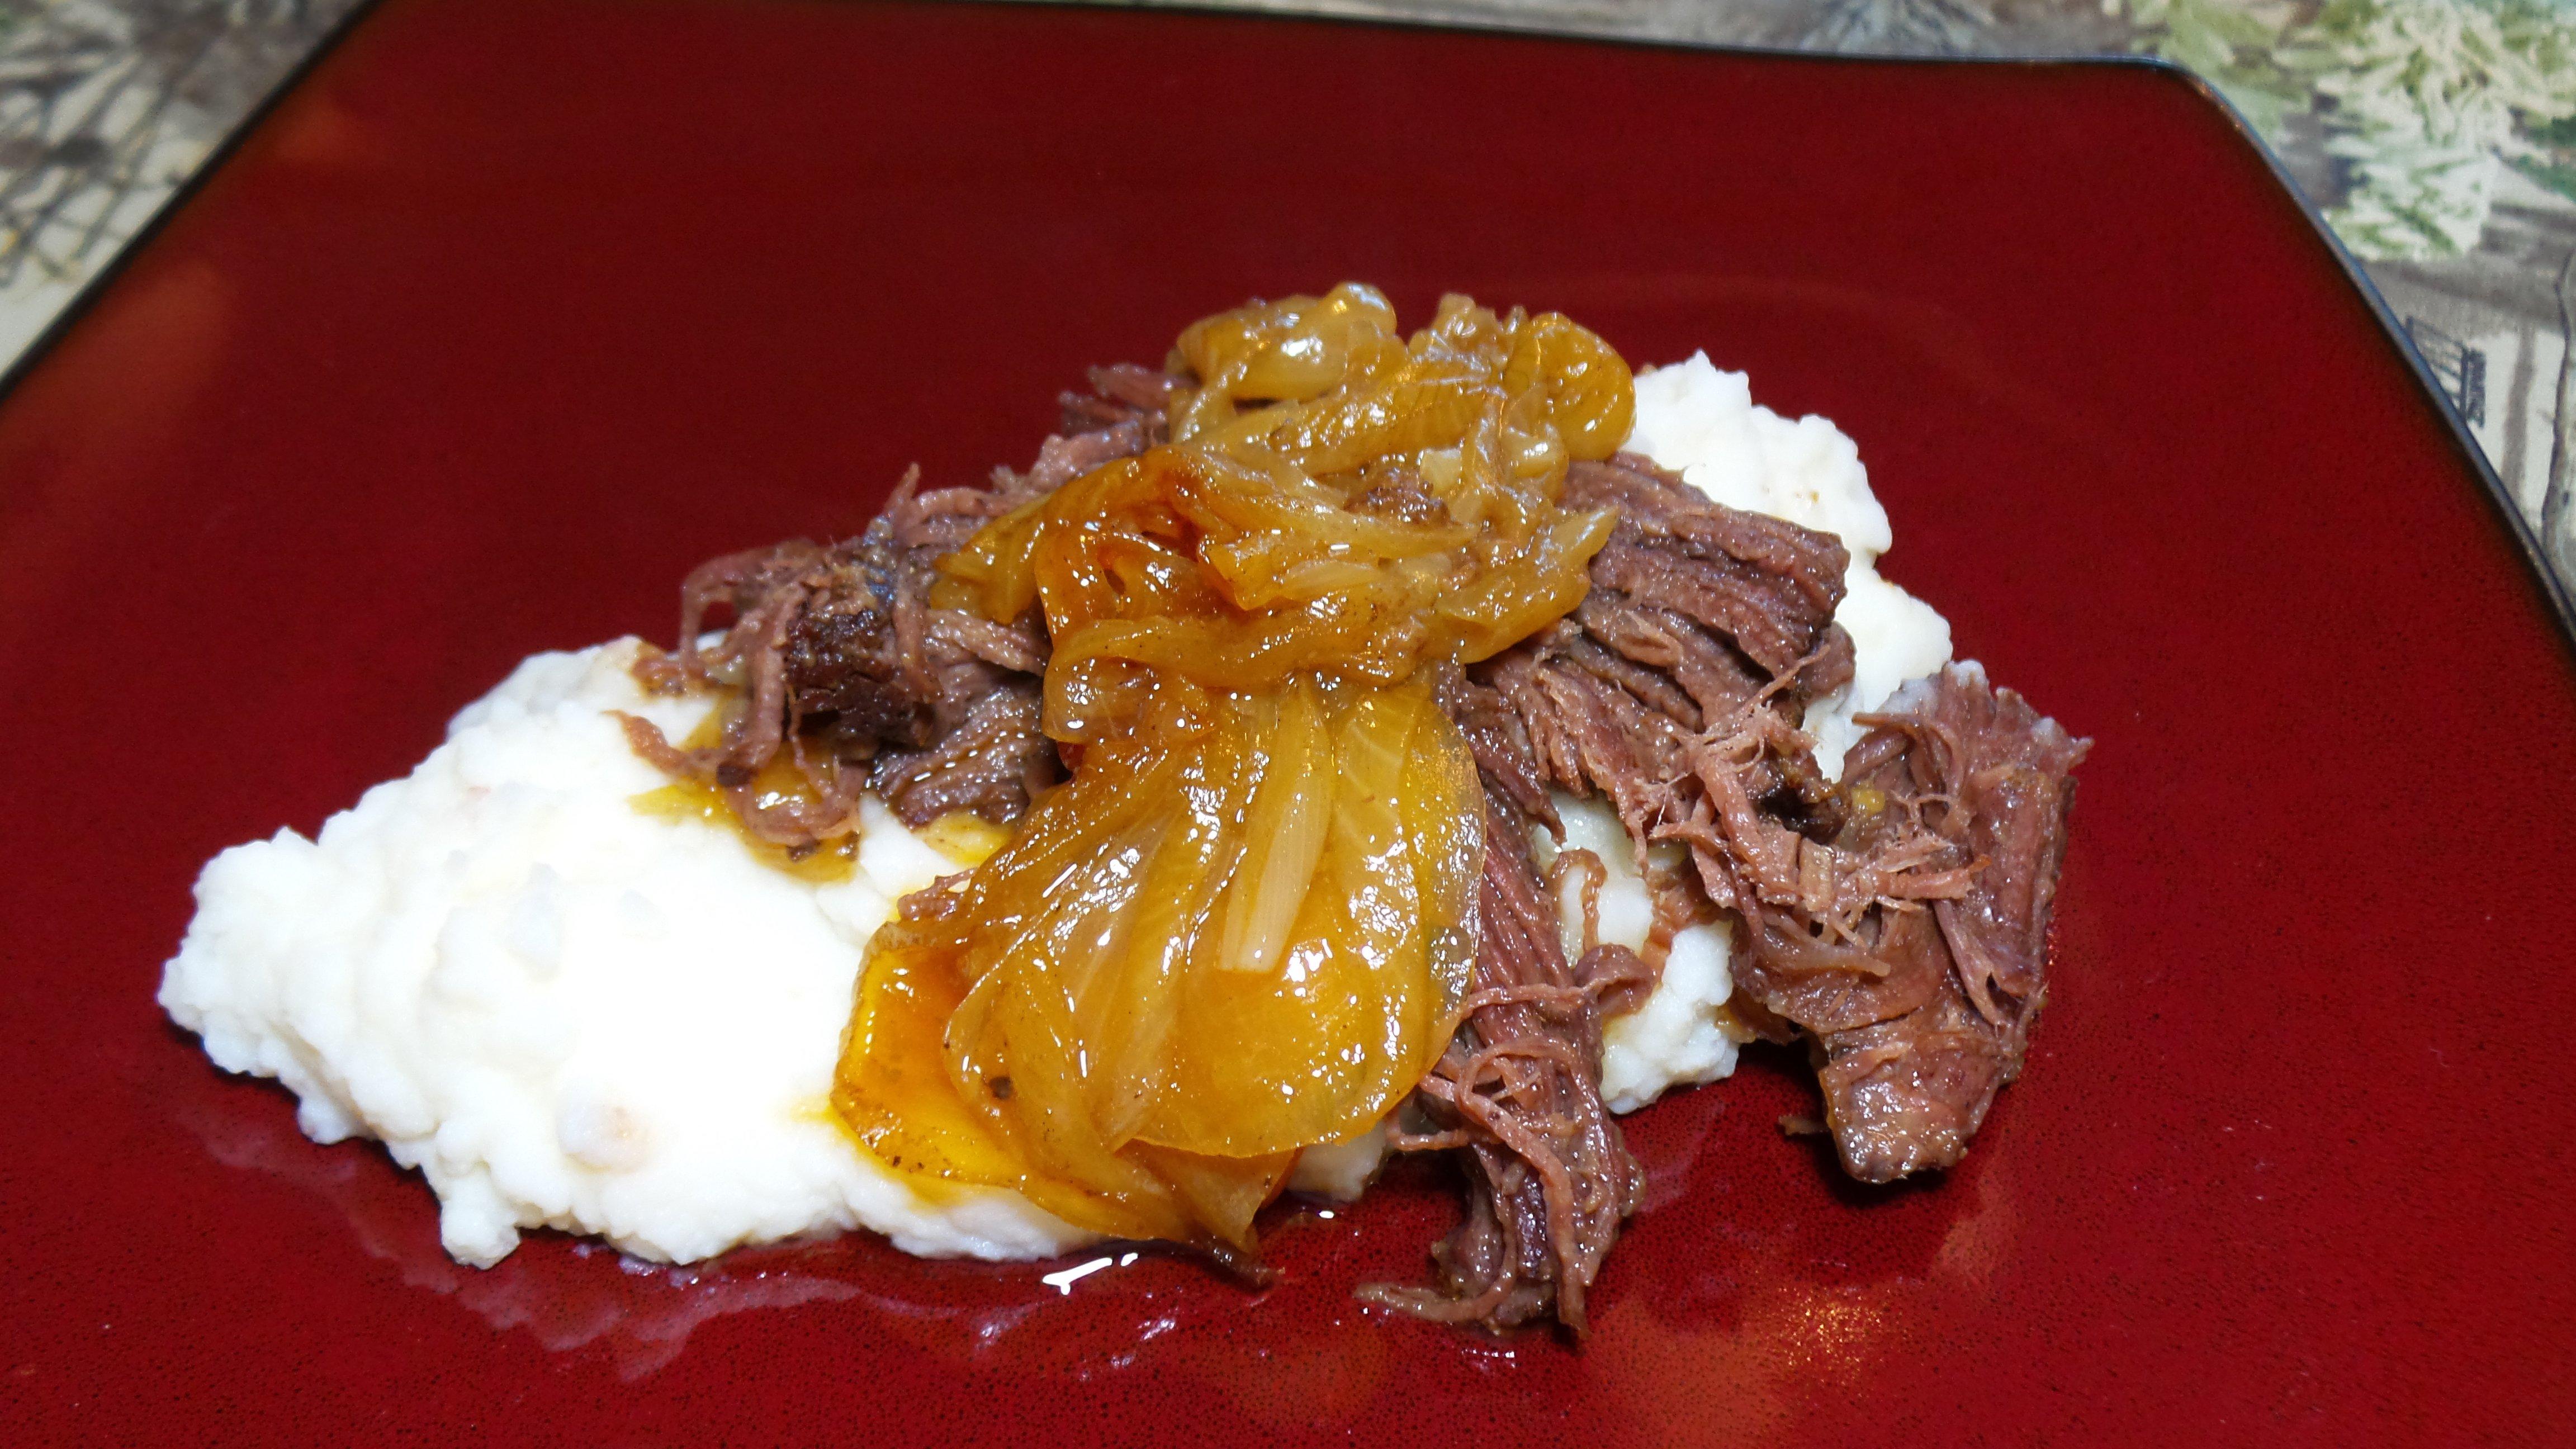 Beer braised elk chuck roast and onions served over mashed potatoes.